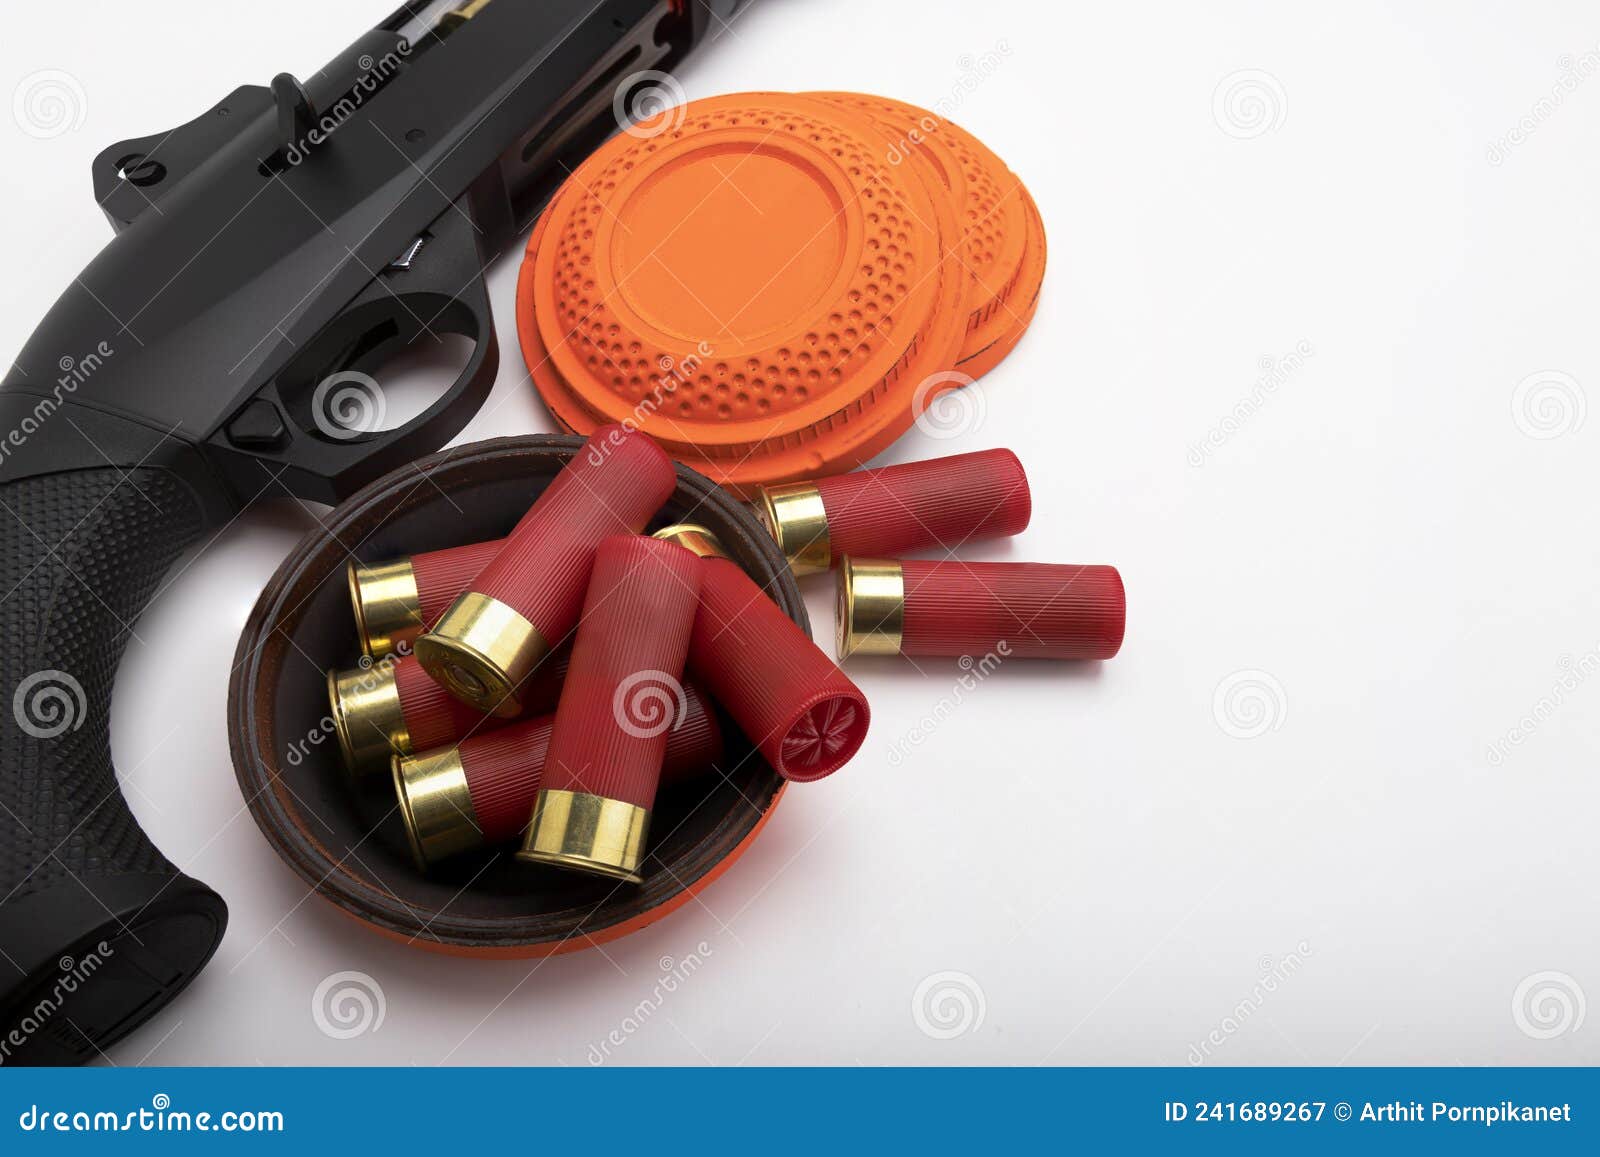 Semi Automatic Shotgun and Bullet Shells on White Background , Clay Pigeons Shooting Game Stock Image